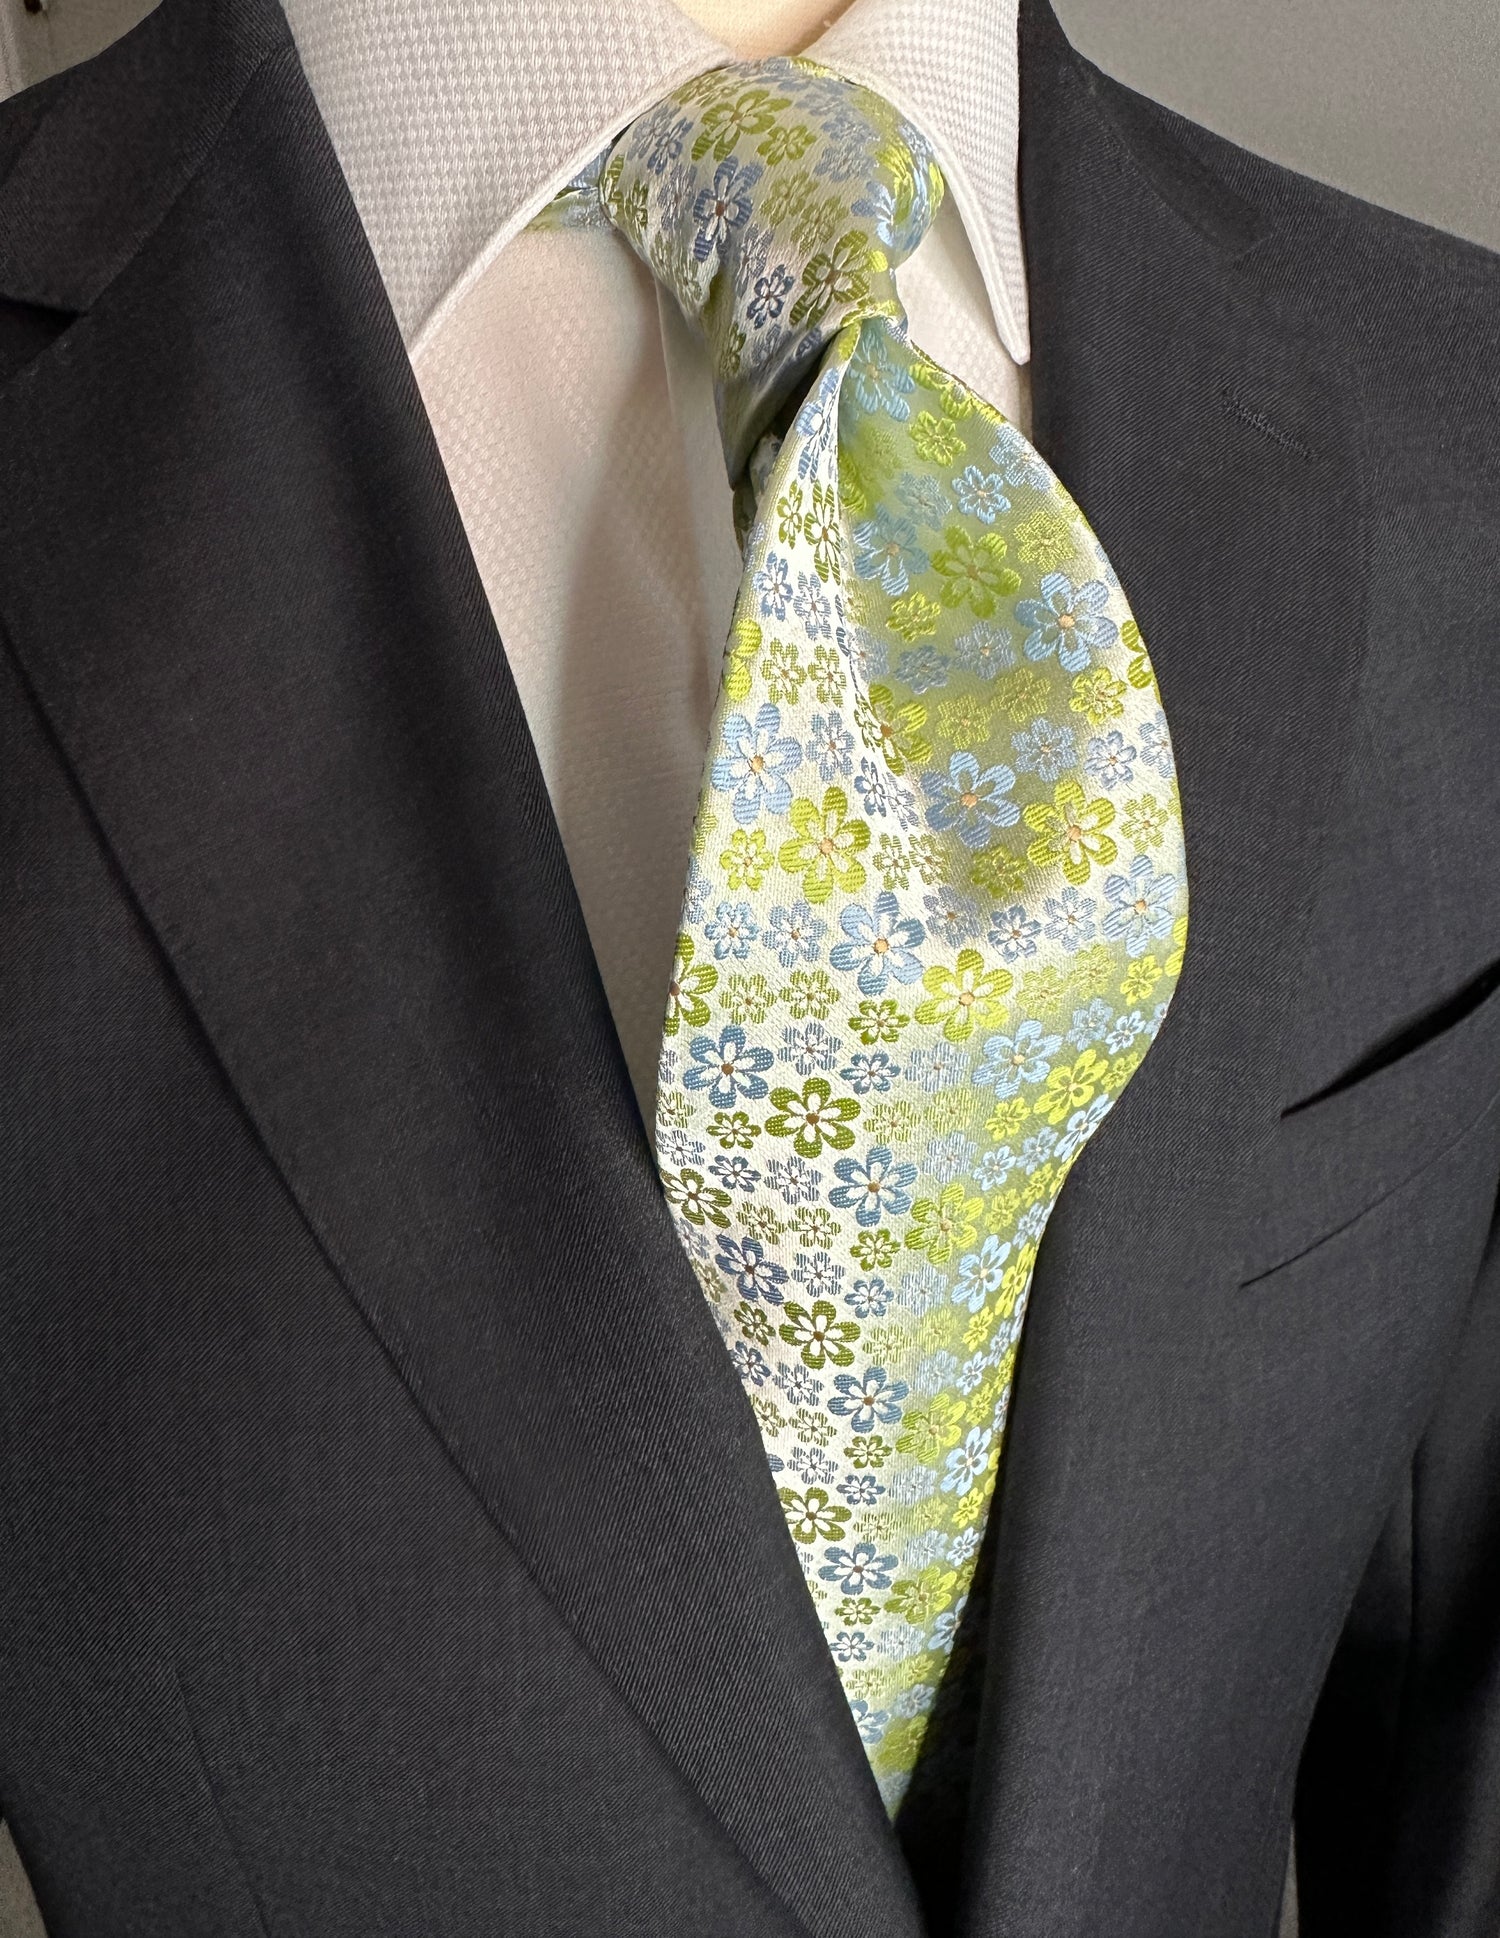 An amazing bright silk woven tie with summer mini florets. The characteristics of this tie coloration are very interesting in that it tends to take on the colors of what it is paired with. Take for instance the solid charcoal grey suit in the photos. This tie works very well with it. It would also go well with tan, black, navy, pinstripes, plaids and many others. There are always a few ties each season that tend to go with most colors and patterns and this is one of them.